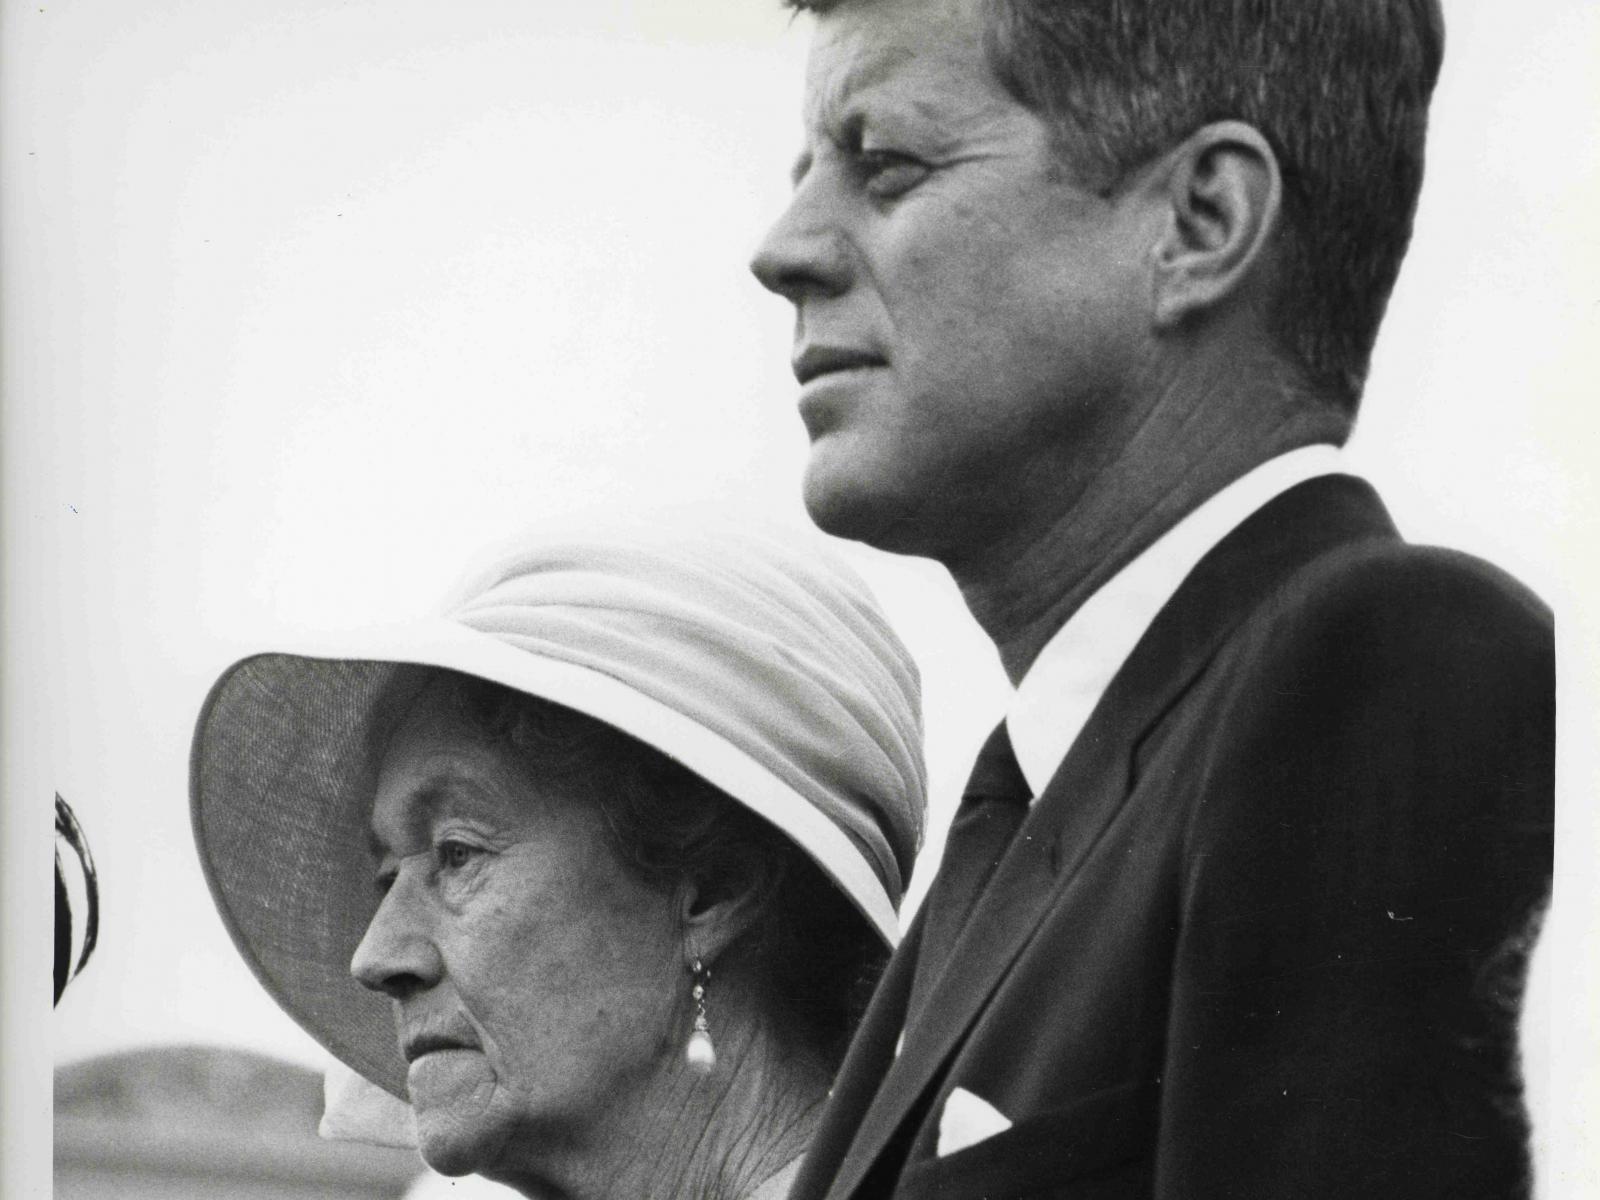 State visit to the United States in 1963